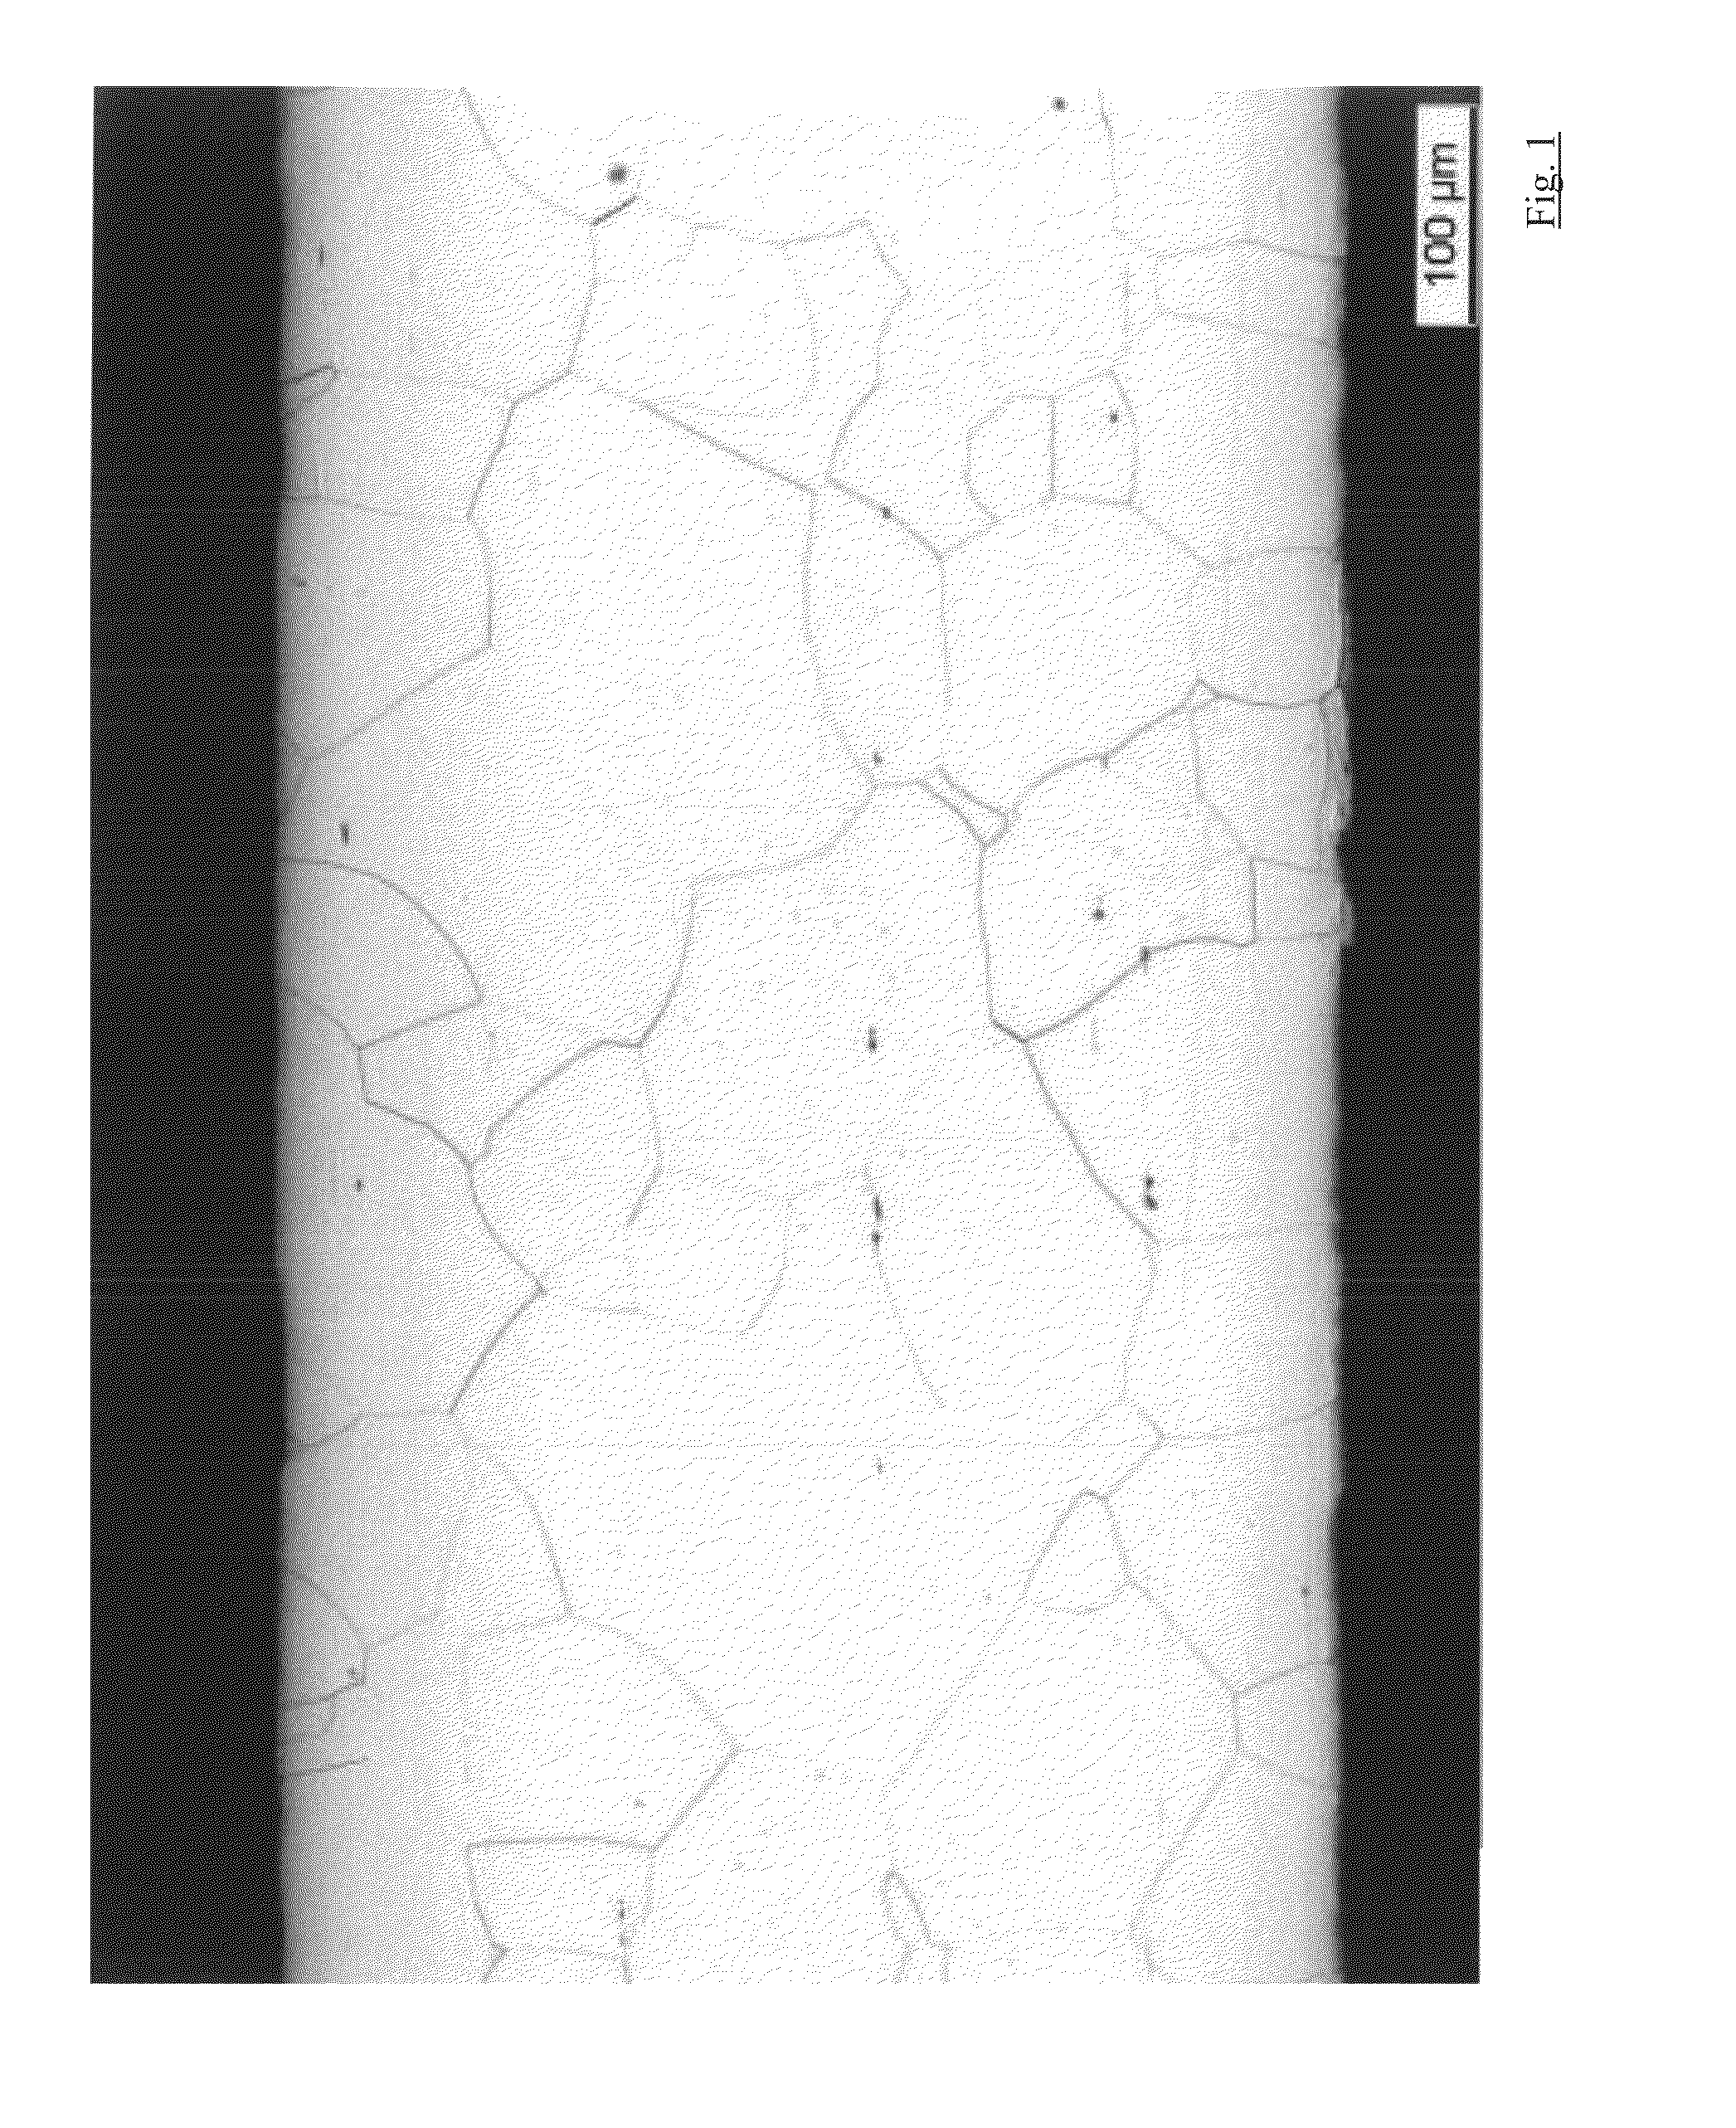 Non-grain-oriented higher-strength electrical strip with high polarisation and method for the production thereof